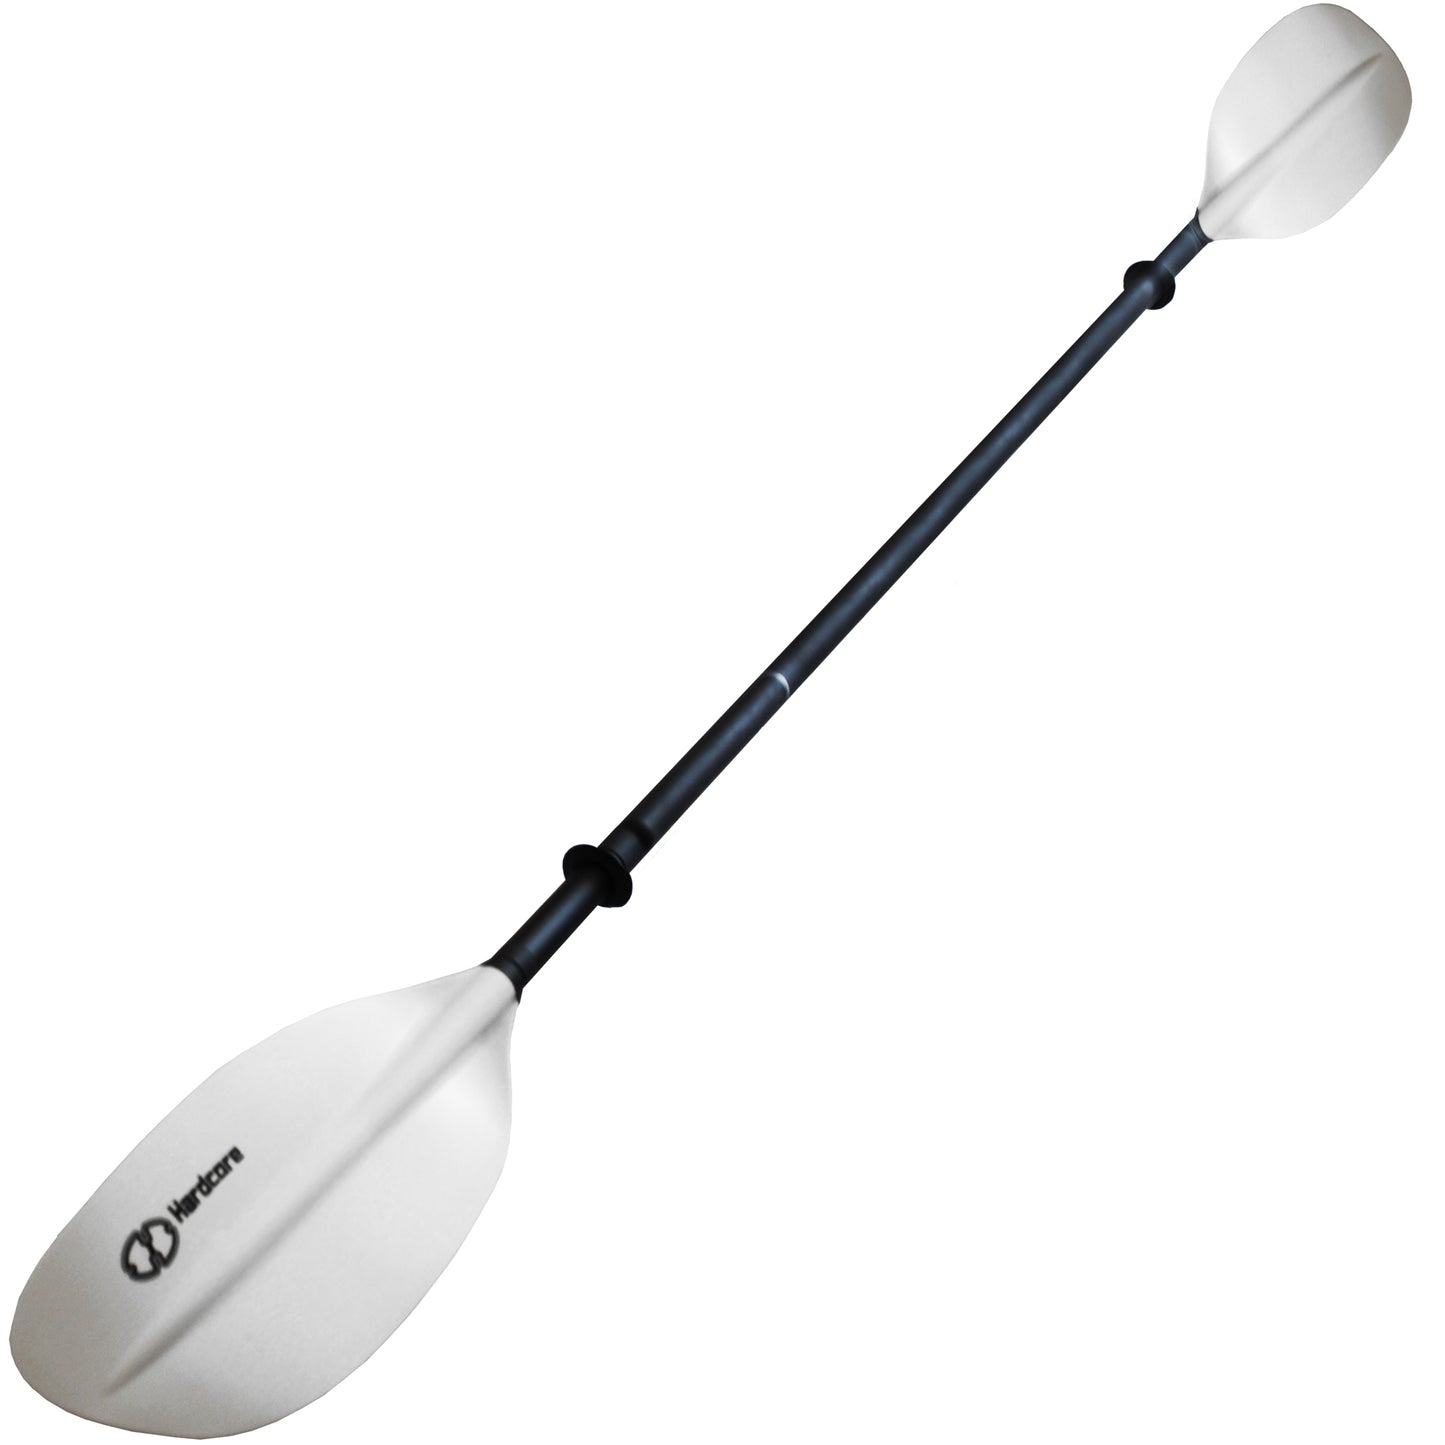 Kids Kayak Paddle | River Tubing paddle | Double Oars for River Run